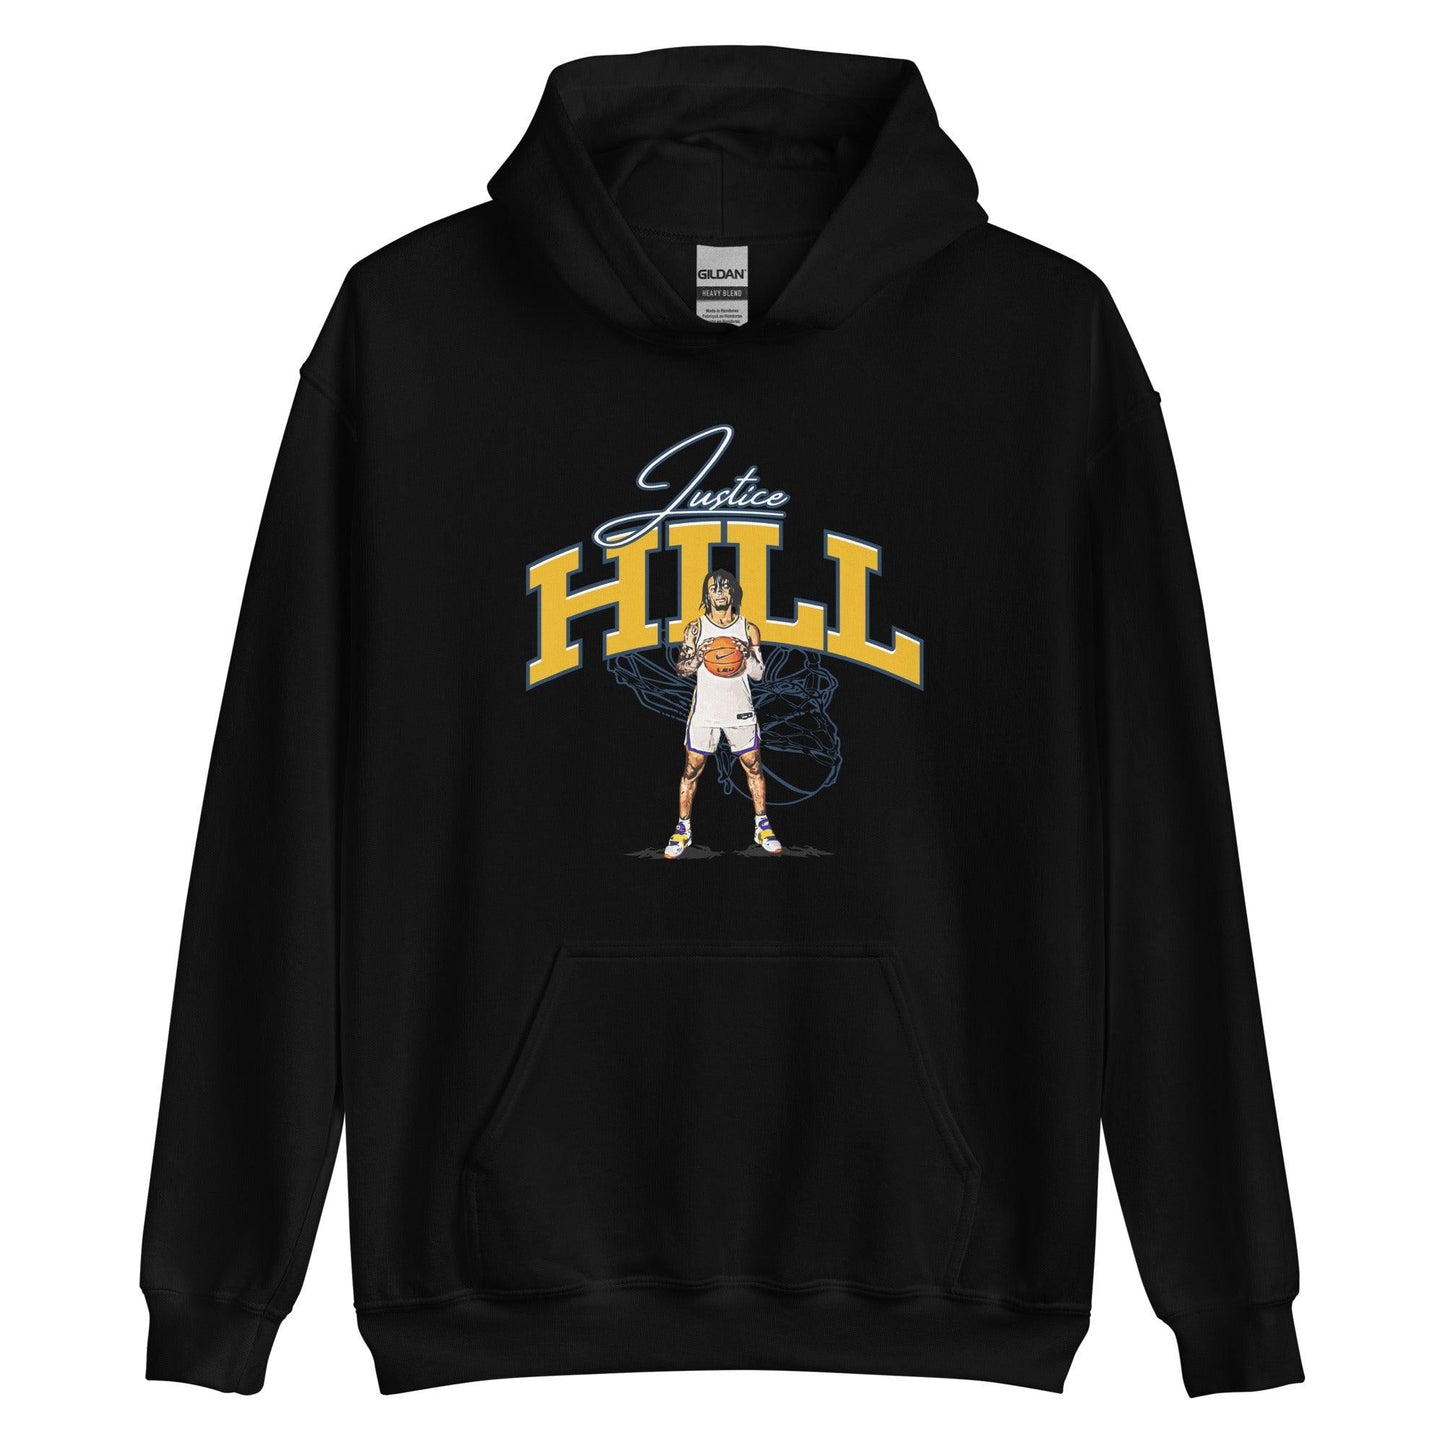 Justice Hill "Gameday" Hoodie - Fan Arch